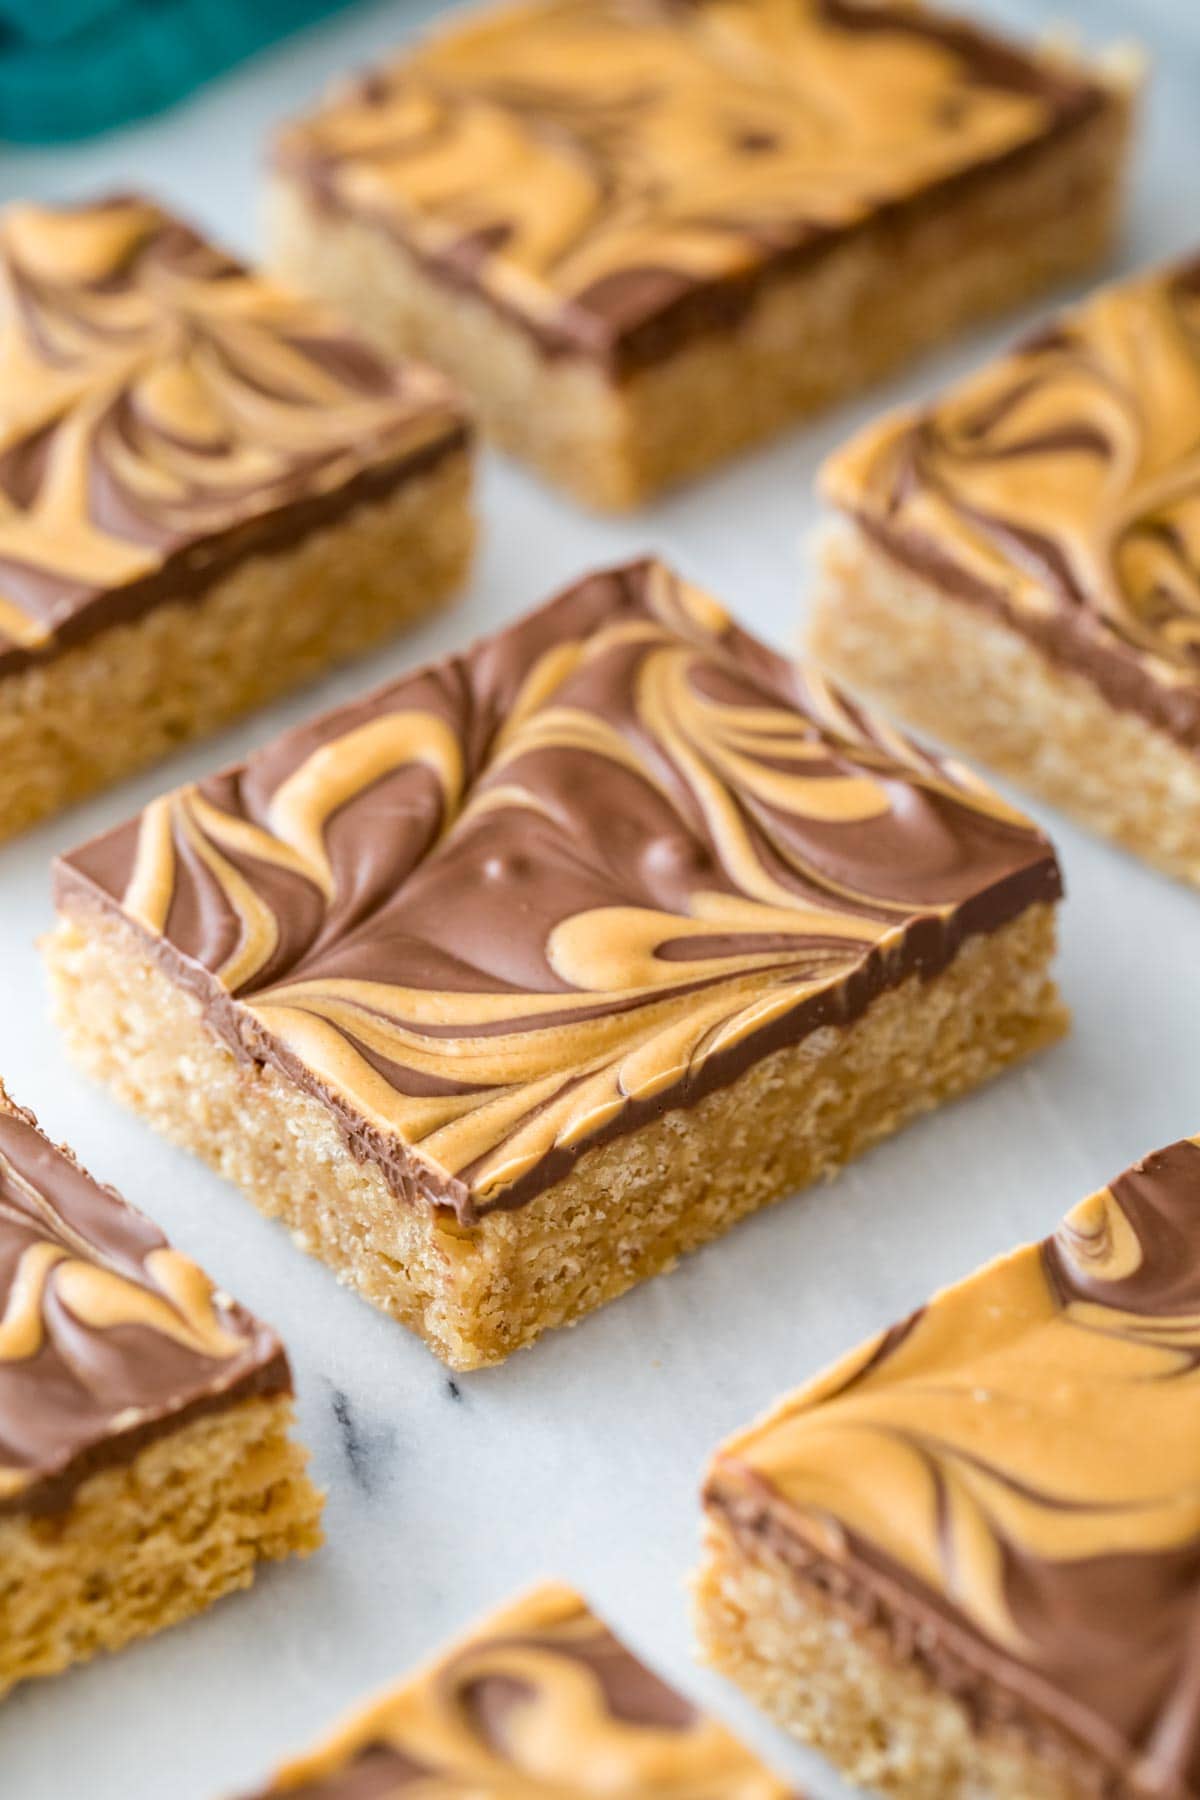 neatly cut scotcharoos with a swirled chocolate and butterscotch topping